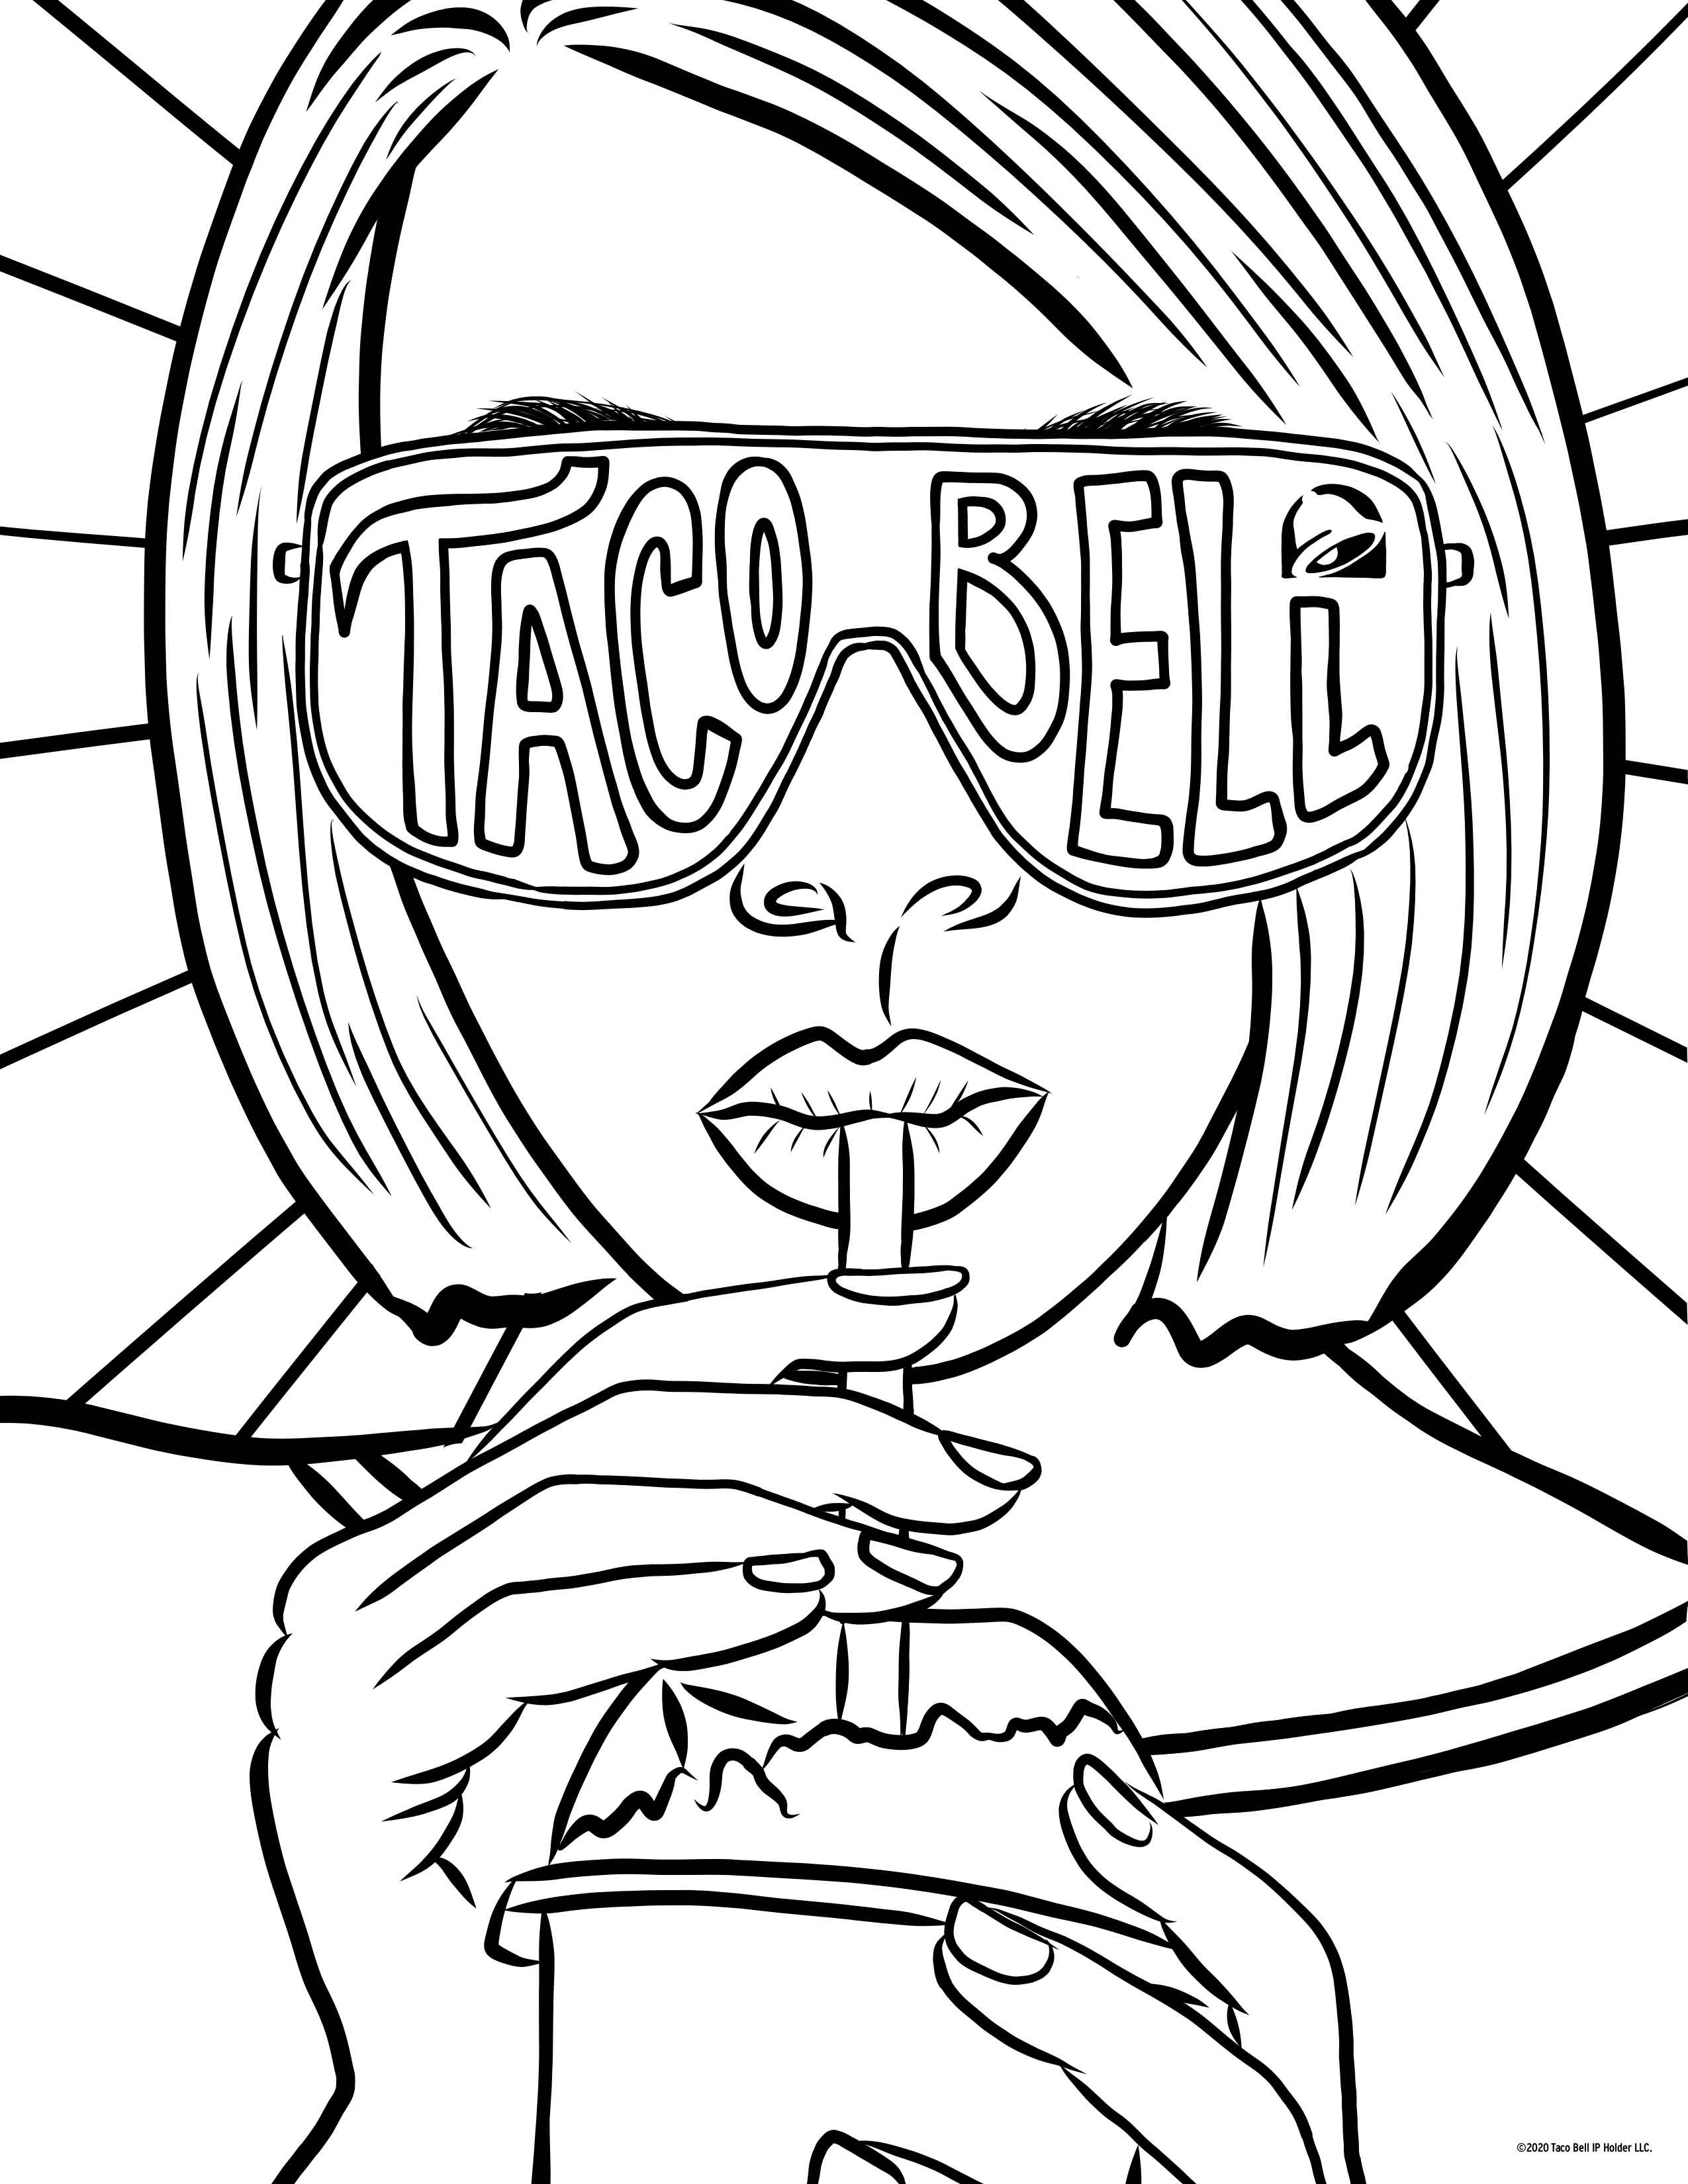 https://www.tacobell.com/images/coloring-page-3-full.jpg